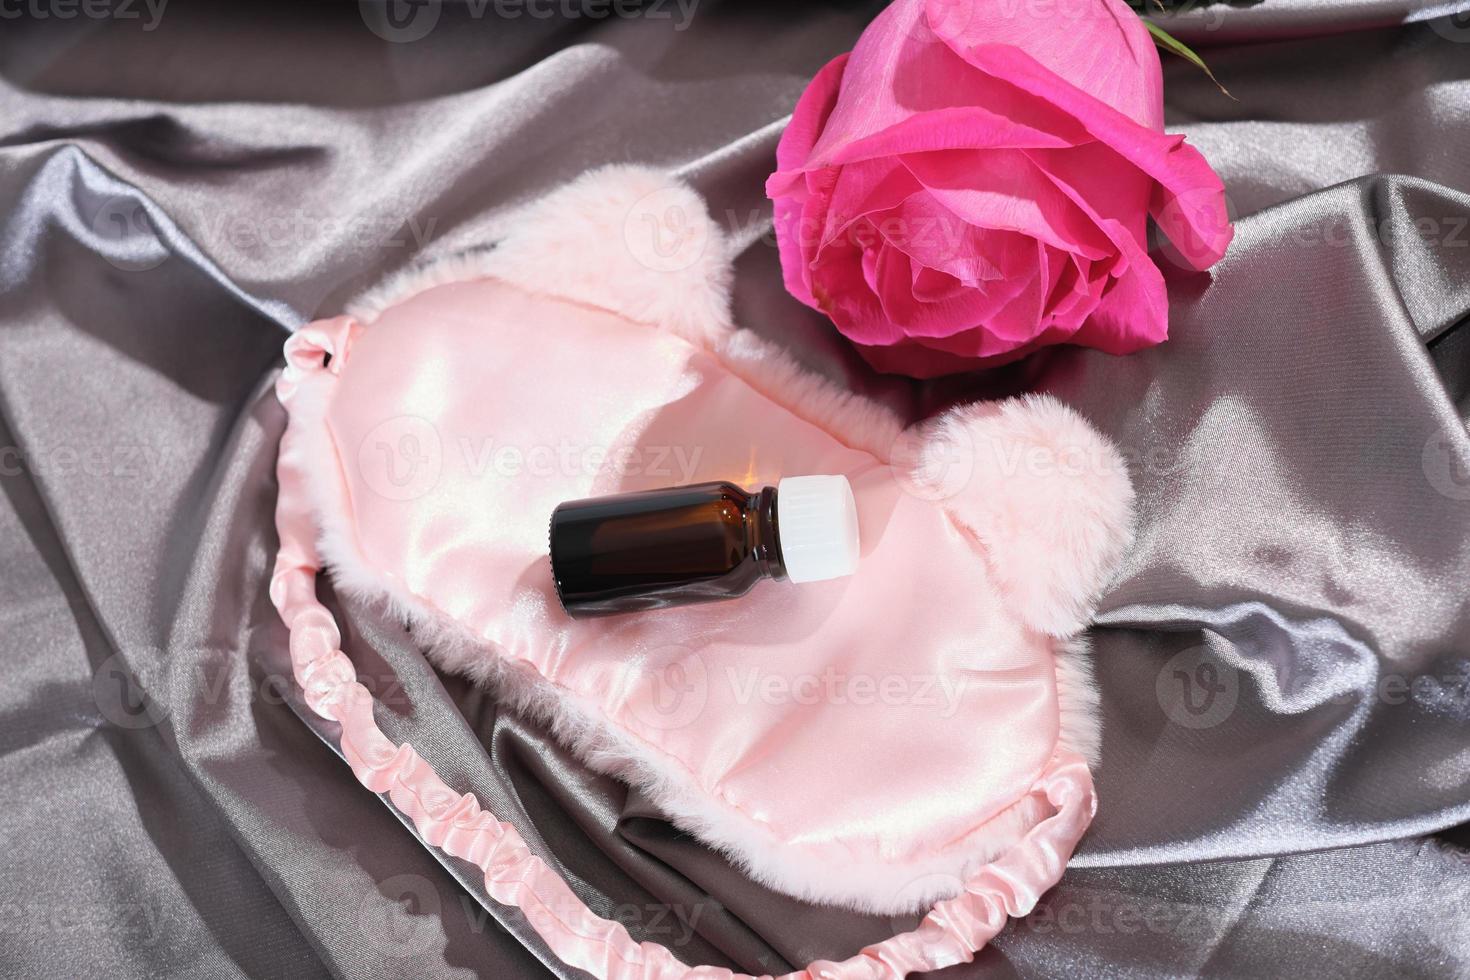 essential rose petal oil in glass amber bottle. sleeping mask and rose flower on silk satin bed sheets. good sleep, aromatherapy concept, natural remedy for treatment of depression, insomnia stress photo